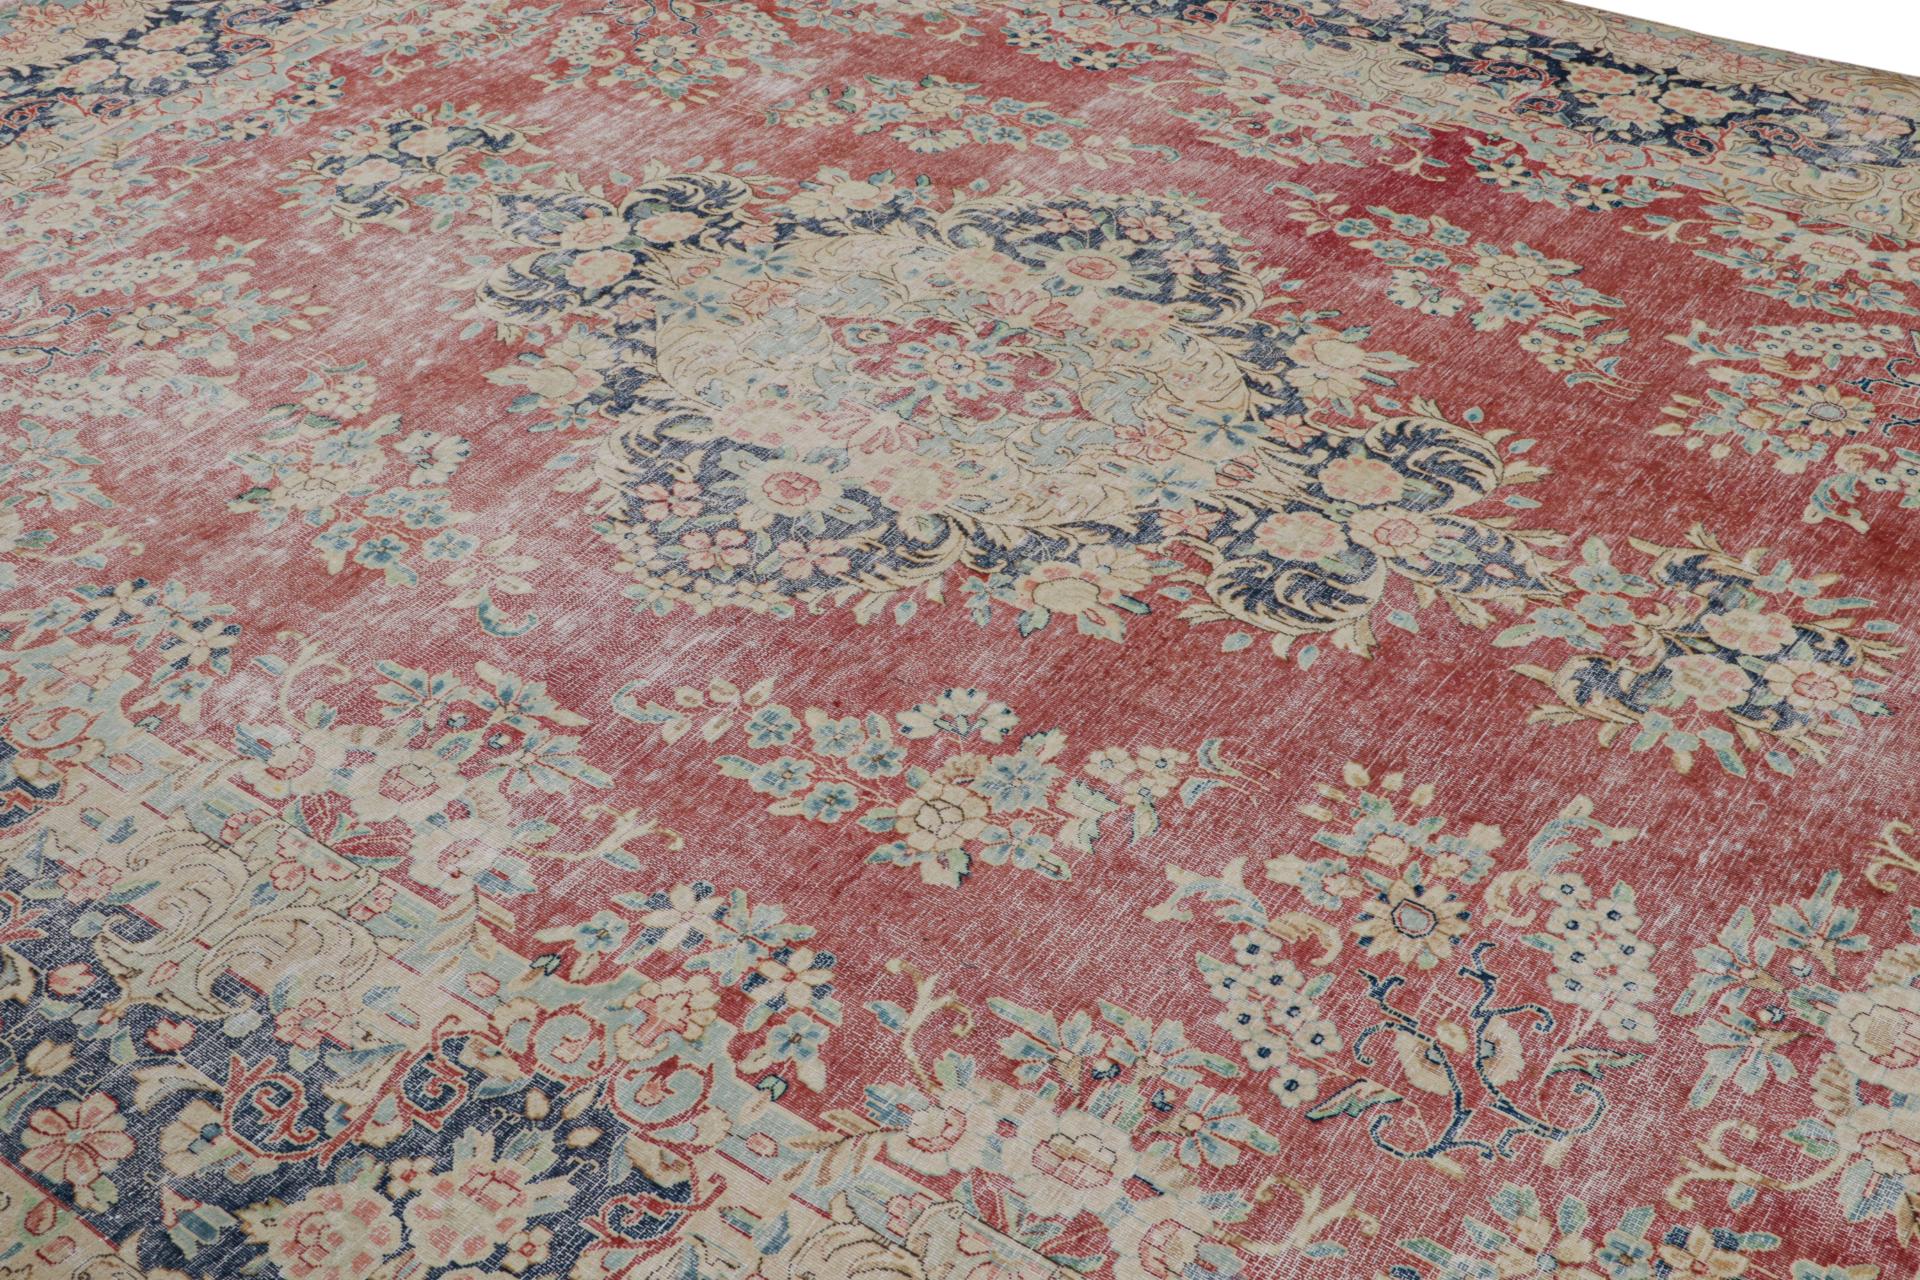 Vintage Persian Kerman rug in Red, Blue and Beige Floral Patterns by Rug & Kilim In Good Condition For Sale In Long Island City, NY